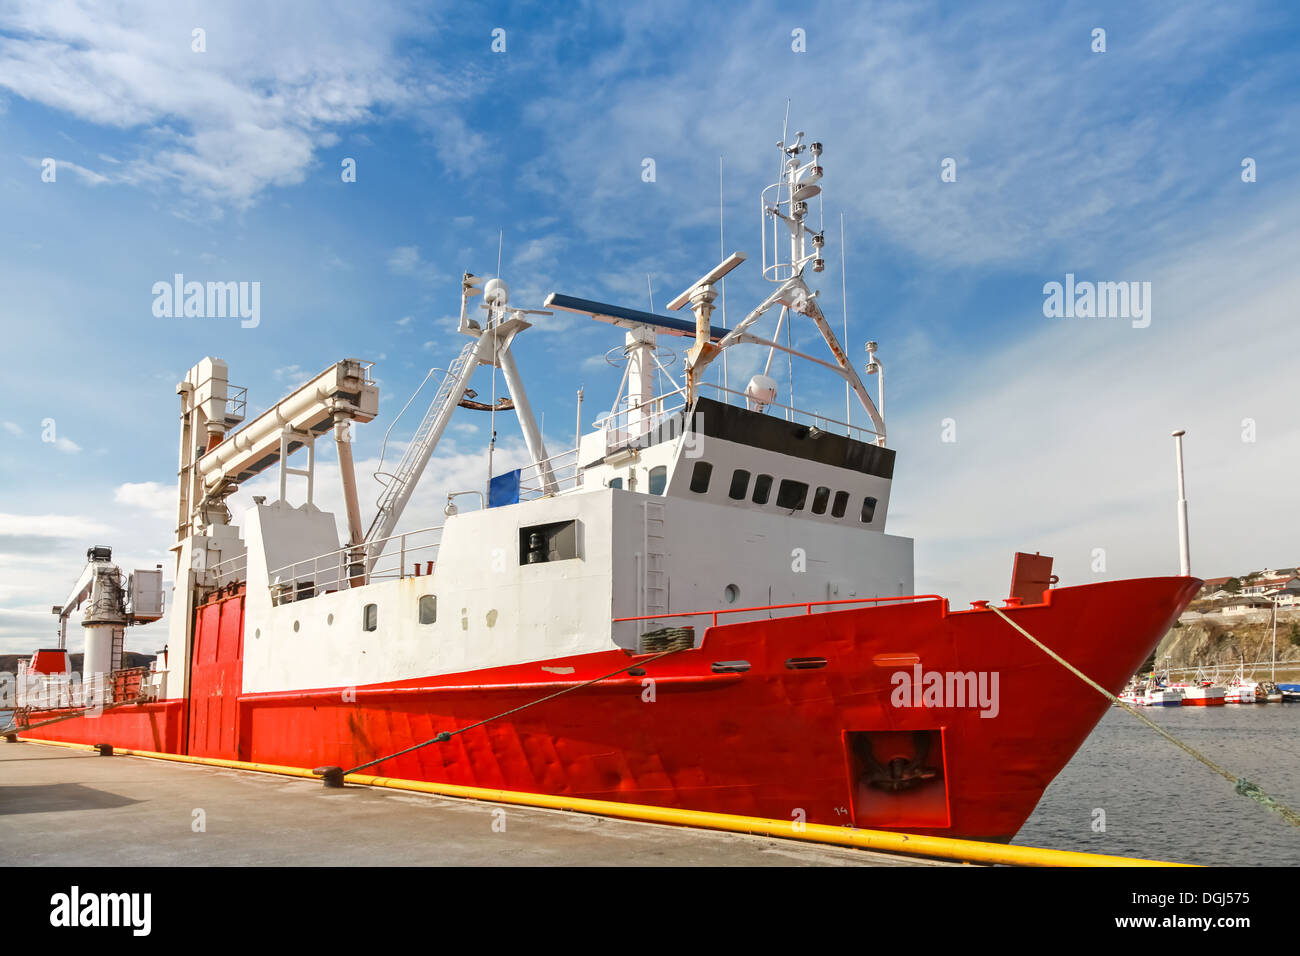 Red freight pallet carrier ship stands moored in Norway coastal town Stock Photo